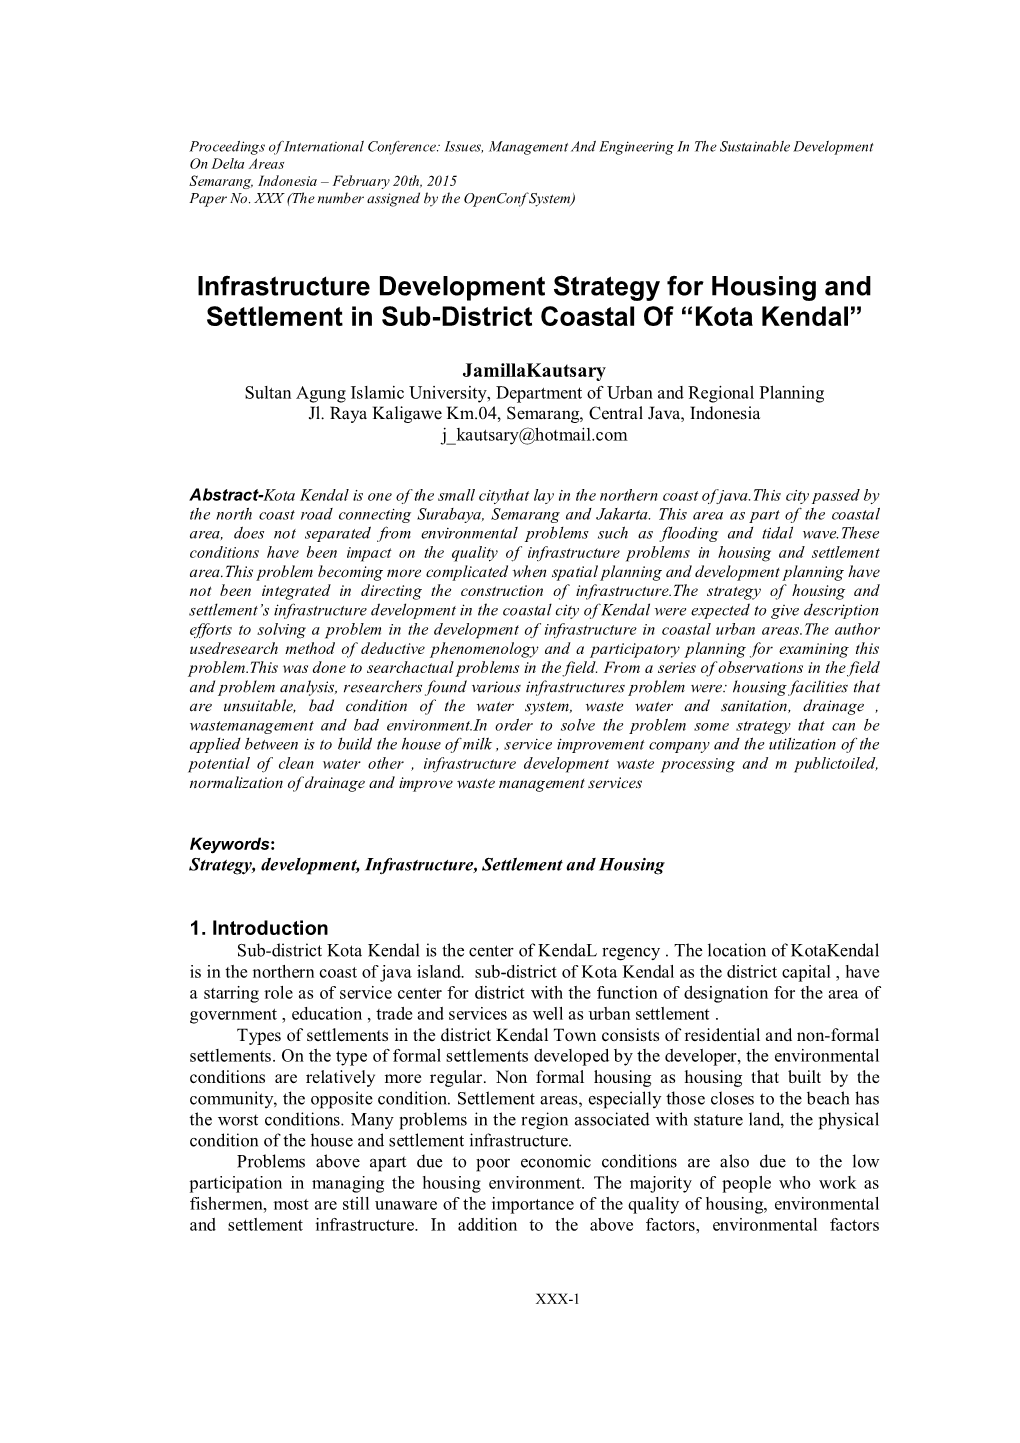 Infrastructure Development Strategy for Housing and Settlement in Sub-District Coastal of “Kota Kendal”